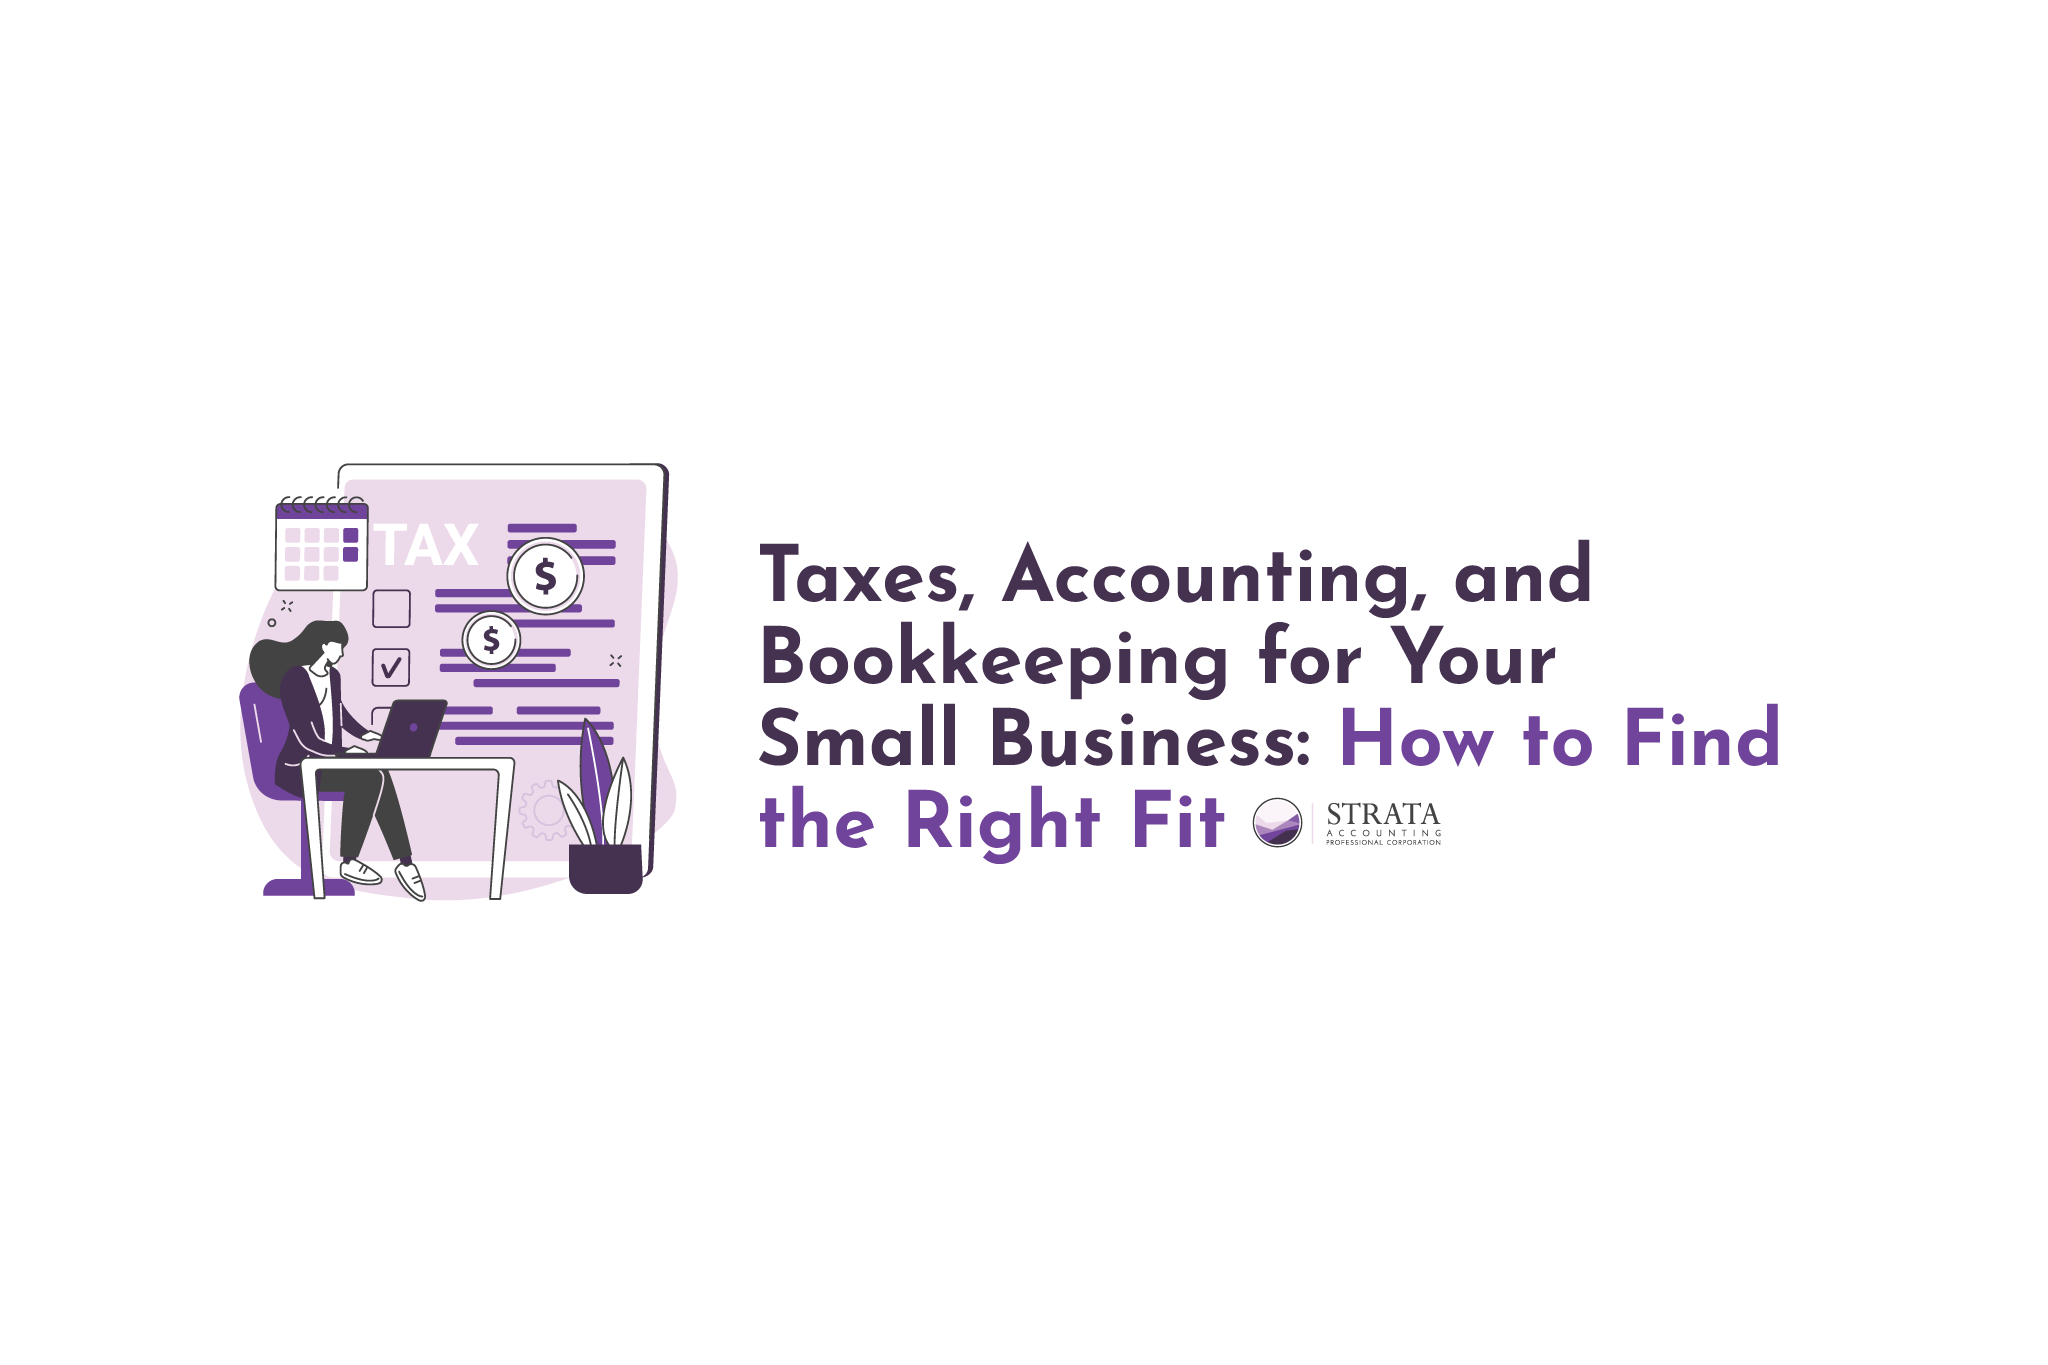 Taxes, Accounting, and Bookkeeping for Your Small Business: How to Find the Right Fit